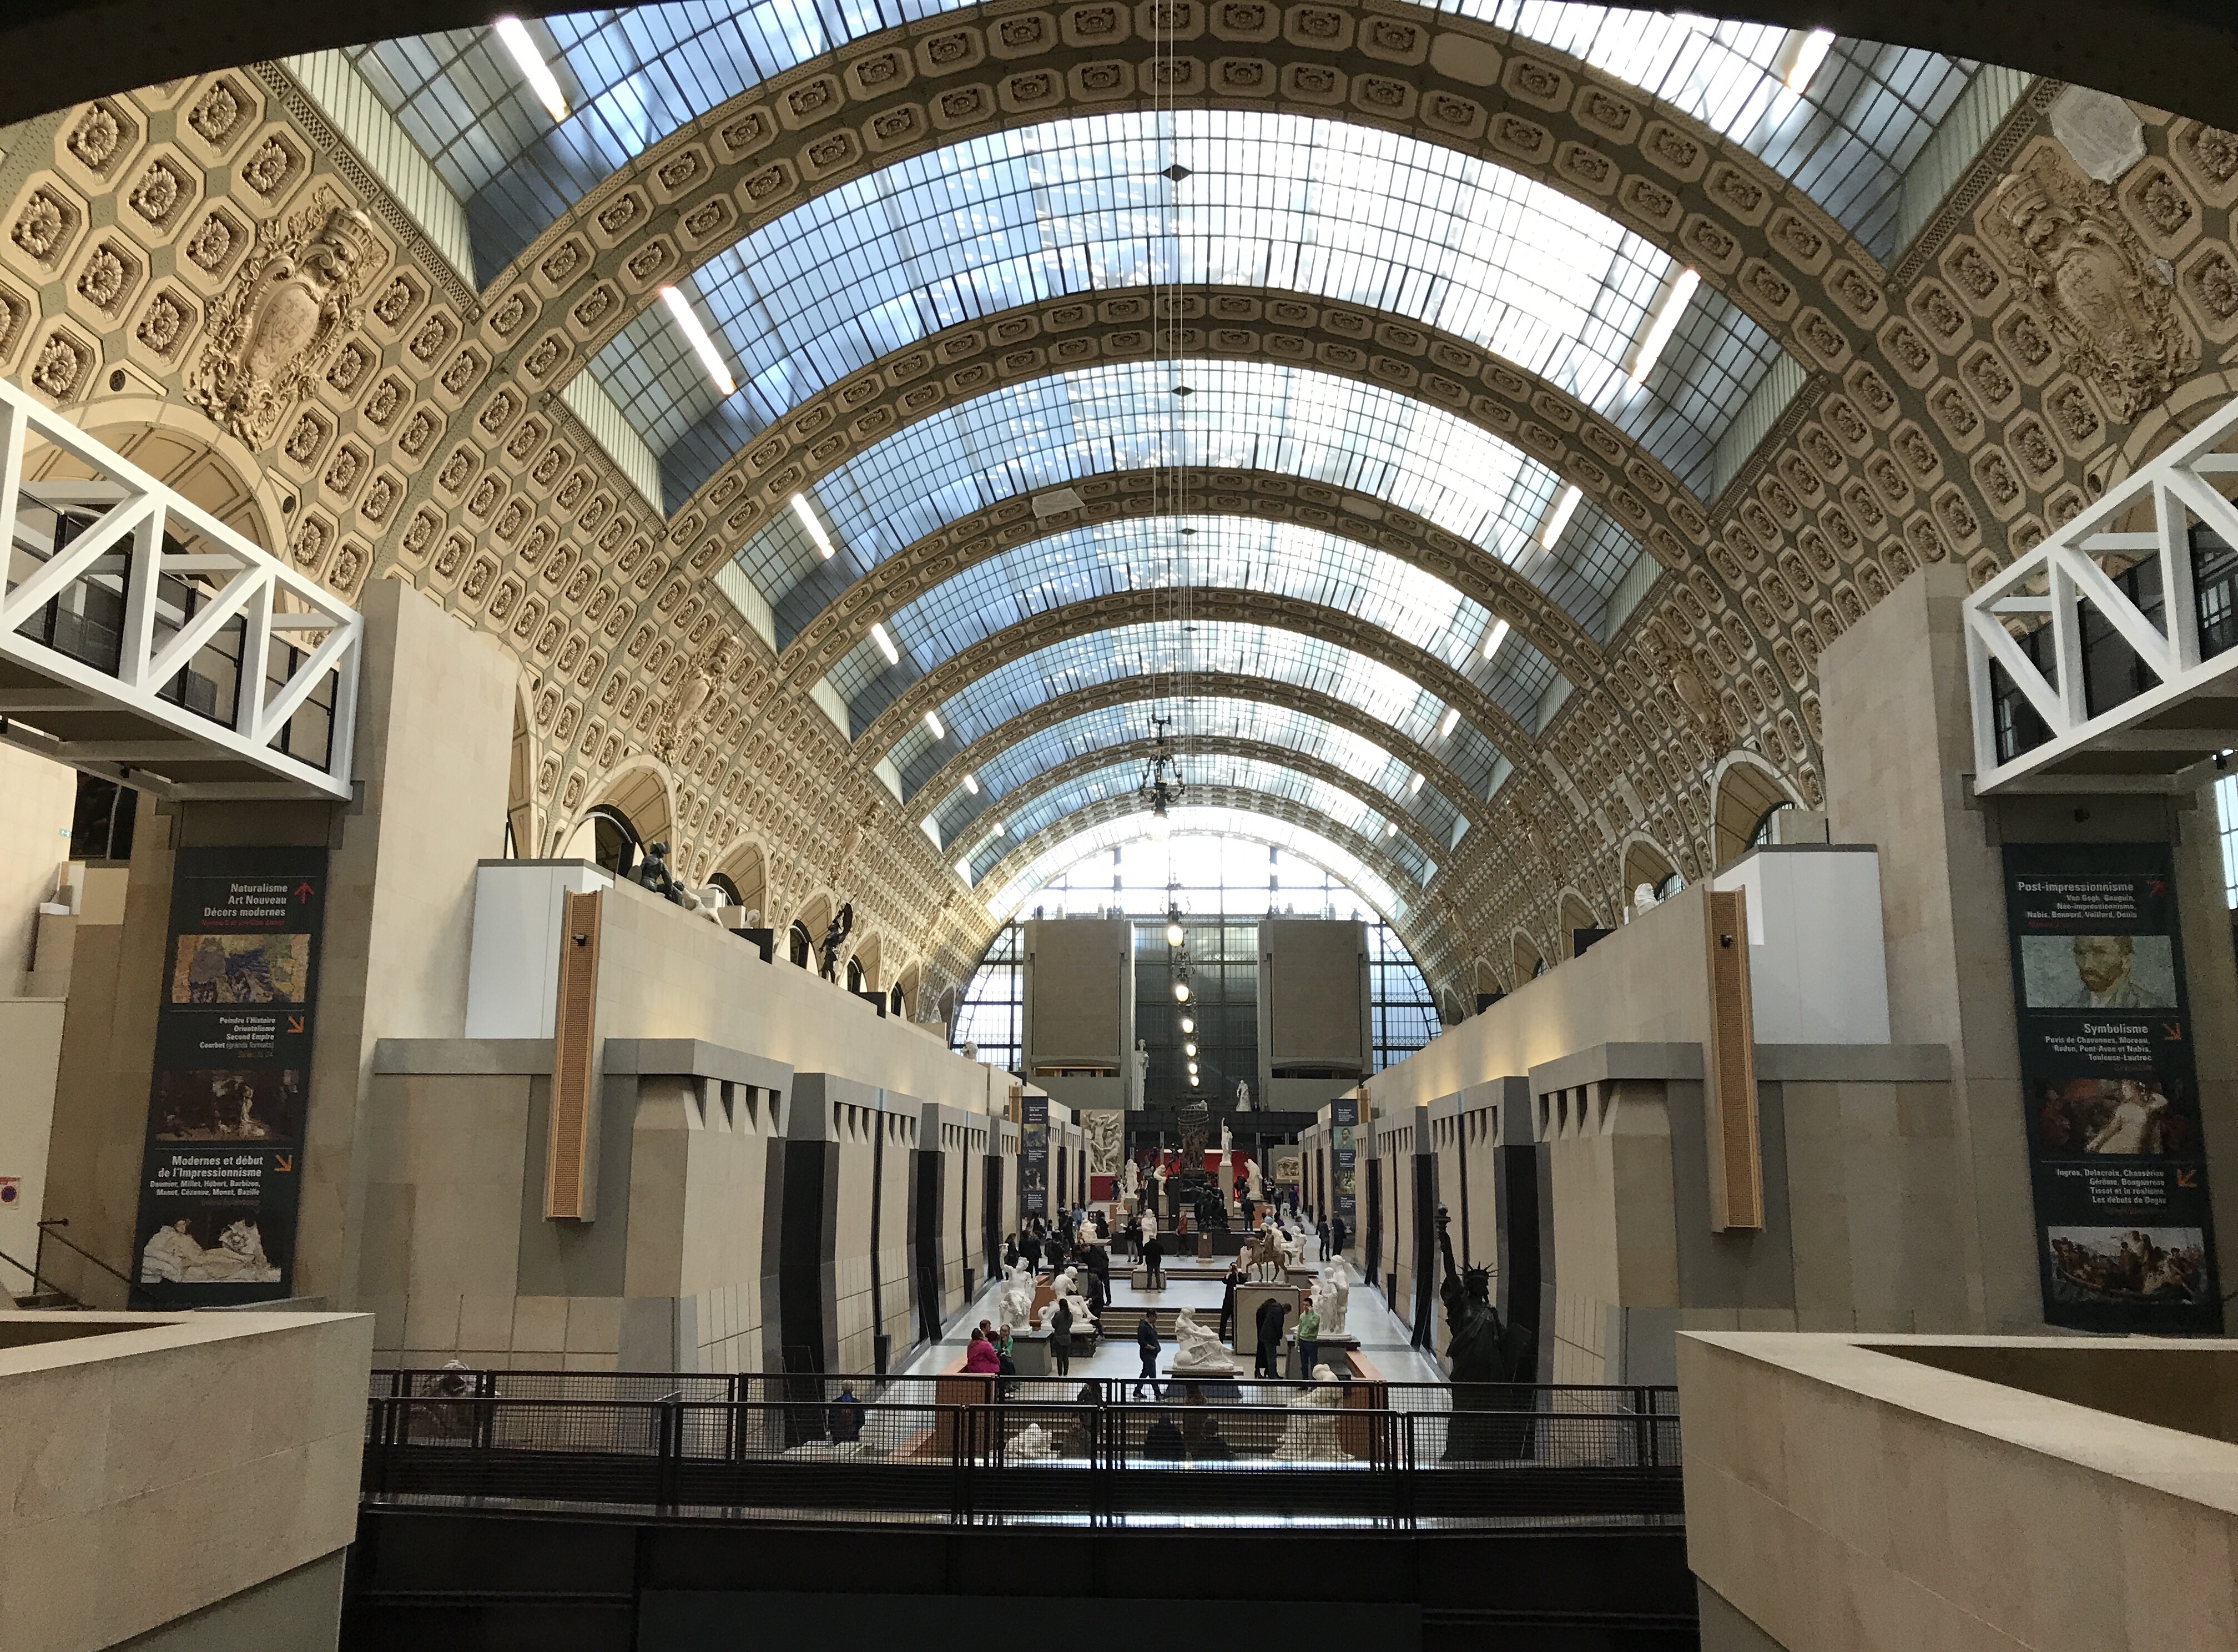 Musee d'Orsay - Story at Every Corner